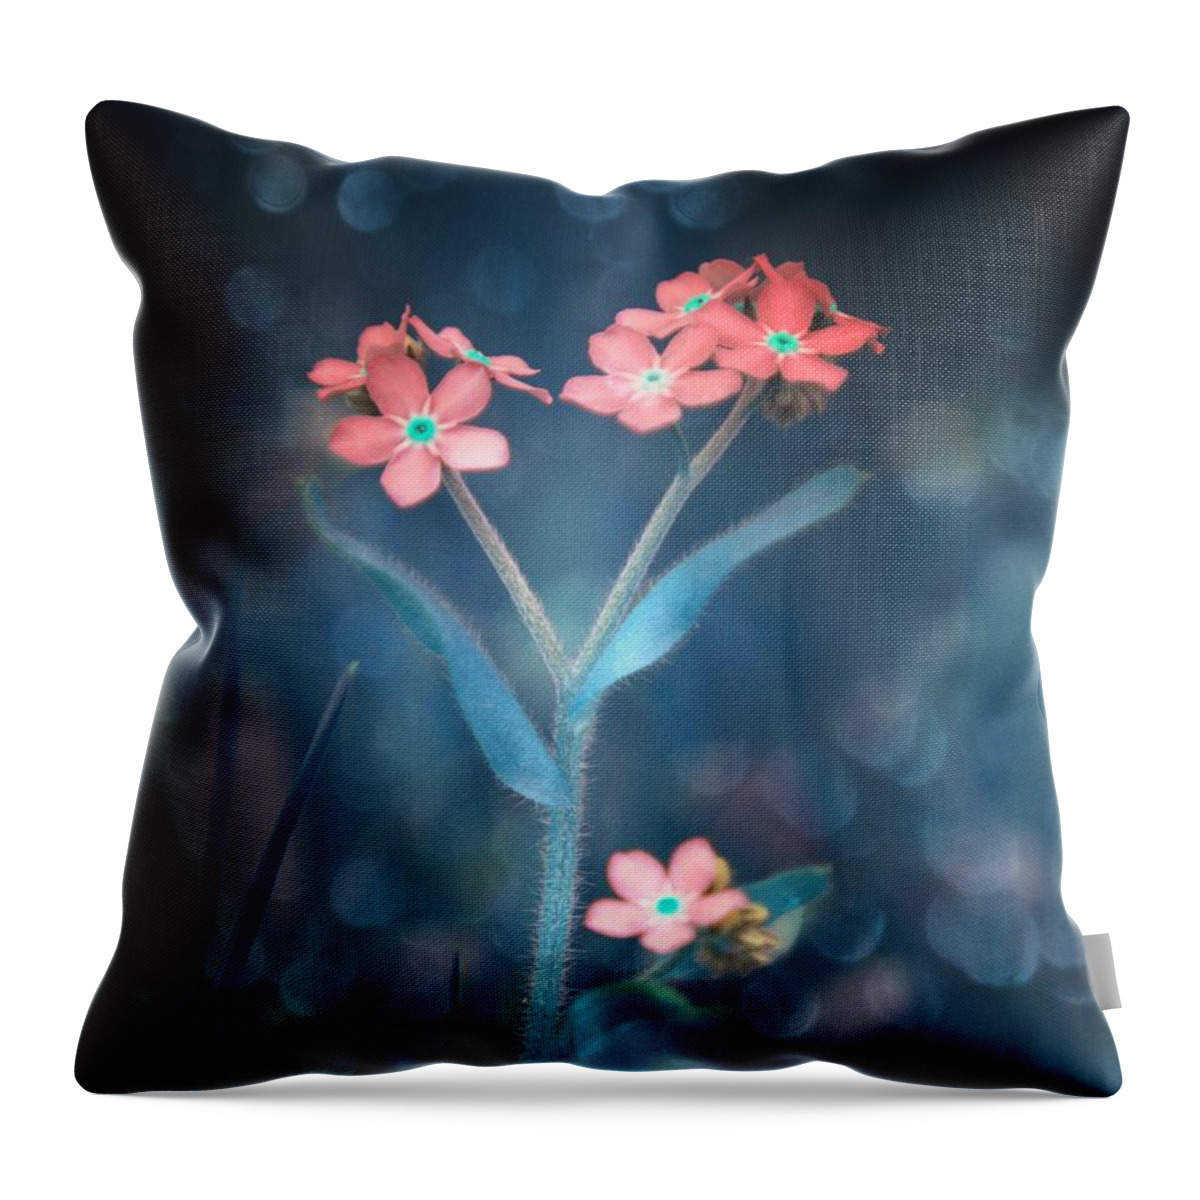 Art Throw Pillow featuring the photograph Forget Me Not I by Joan Han